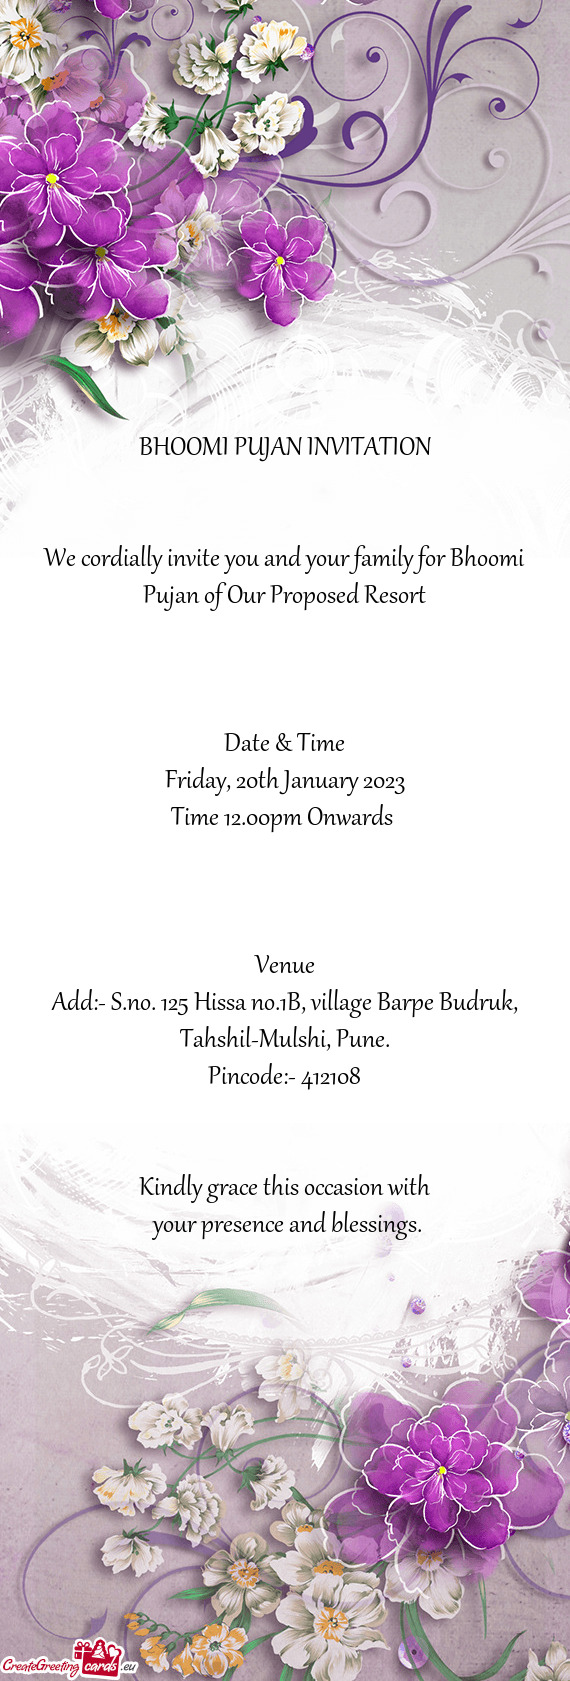 We cordially invite you and your family for Bhoomi Pujan of Our Proposed Resort